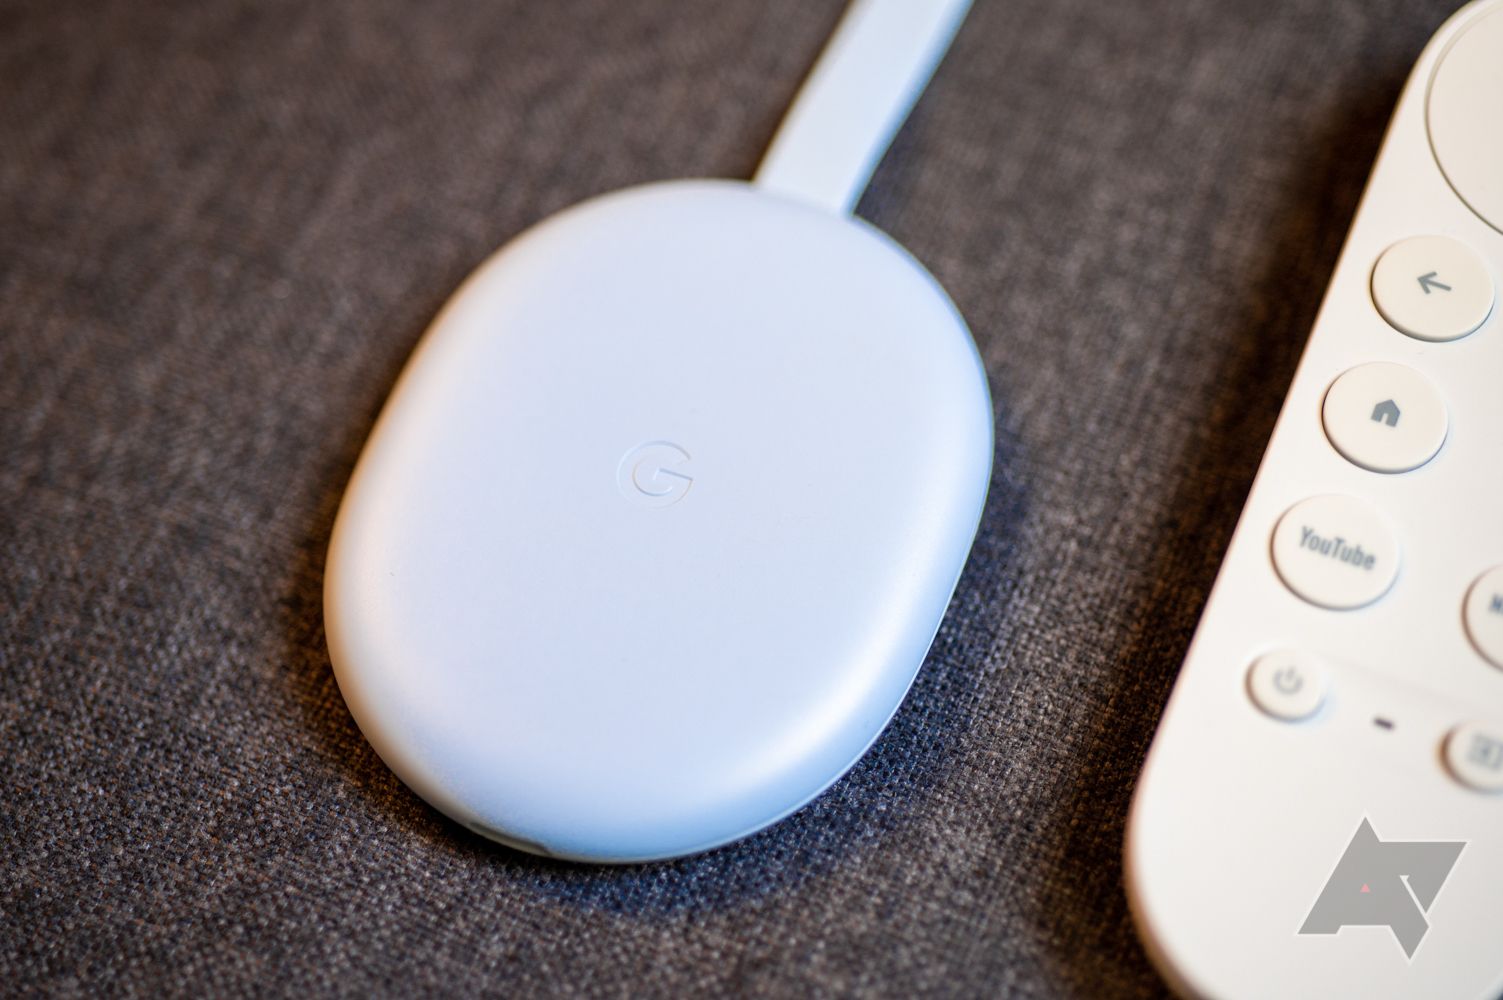 The common Chromecast issues and how to fix them